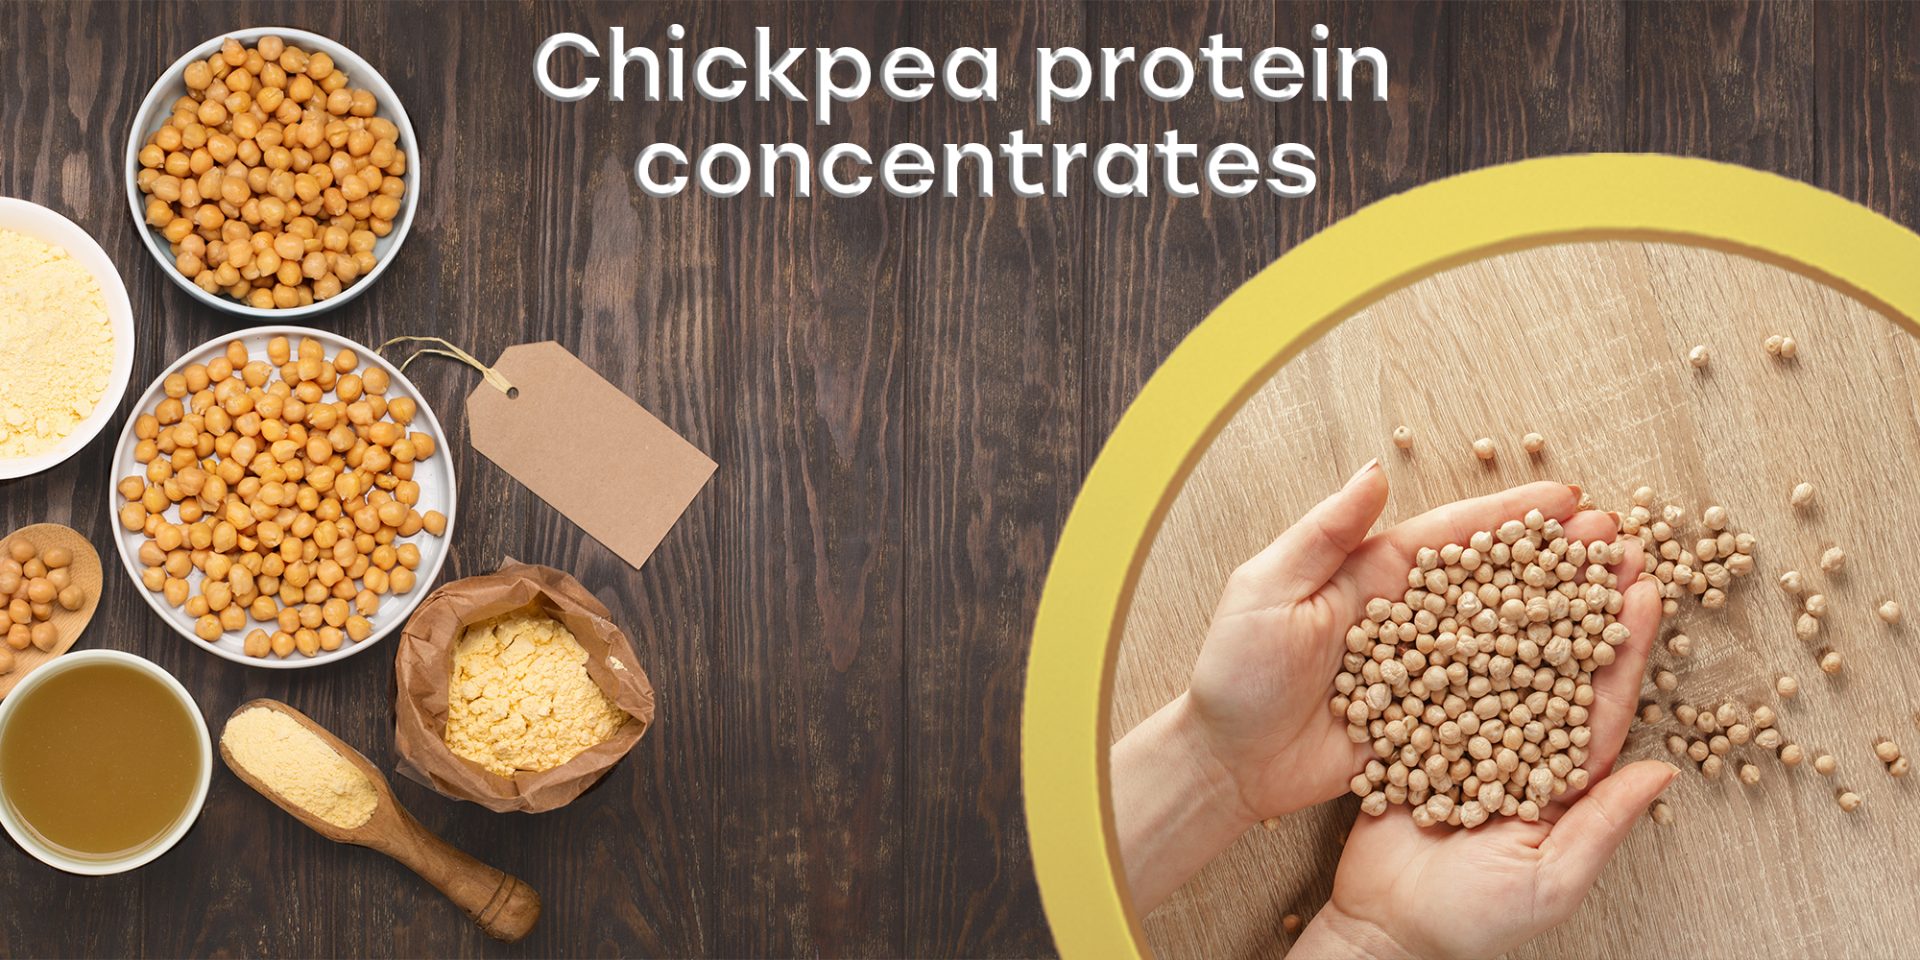 Chickpea protein concentrates